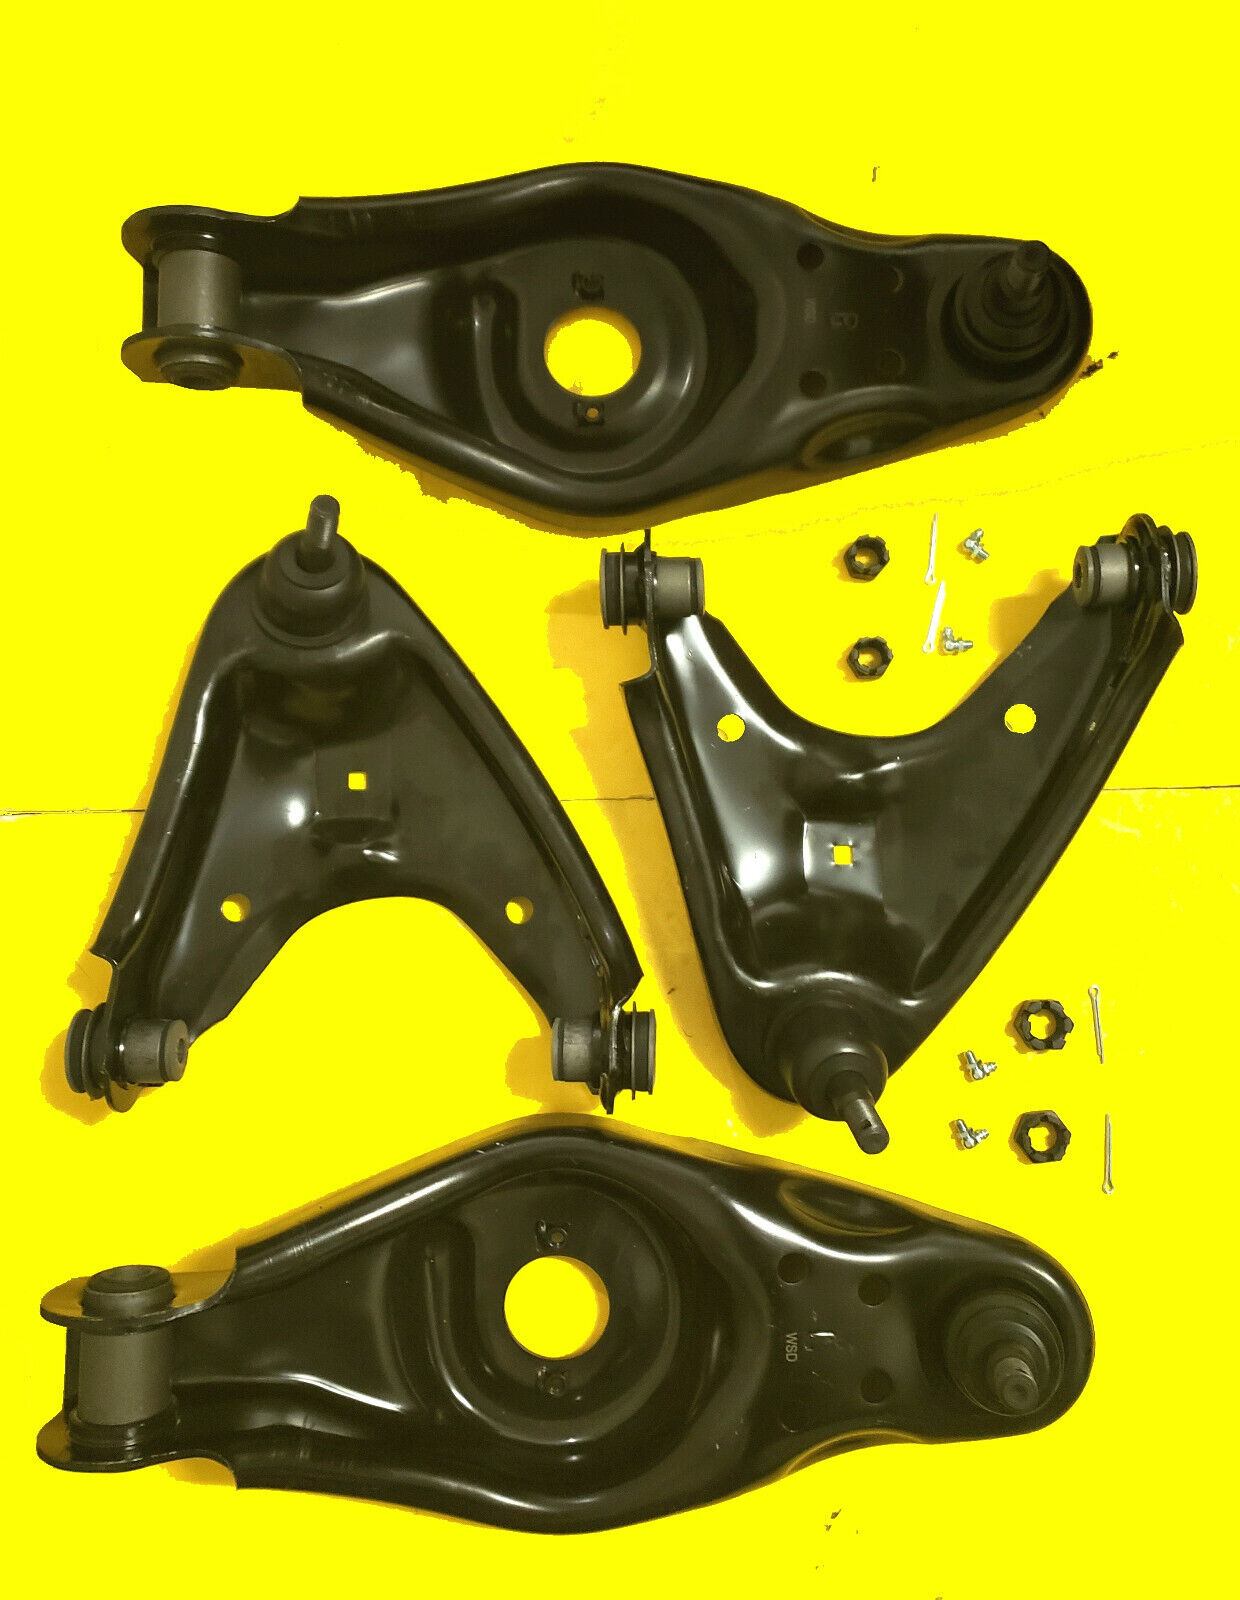 Lower and Upper Control Arm Kit  4 PCS Dodge 1973 1980 D300 3,800 4,000LBS Axle